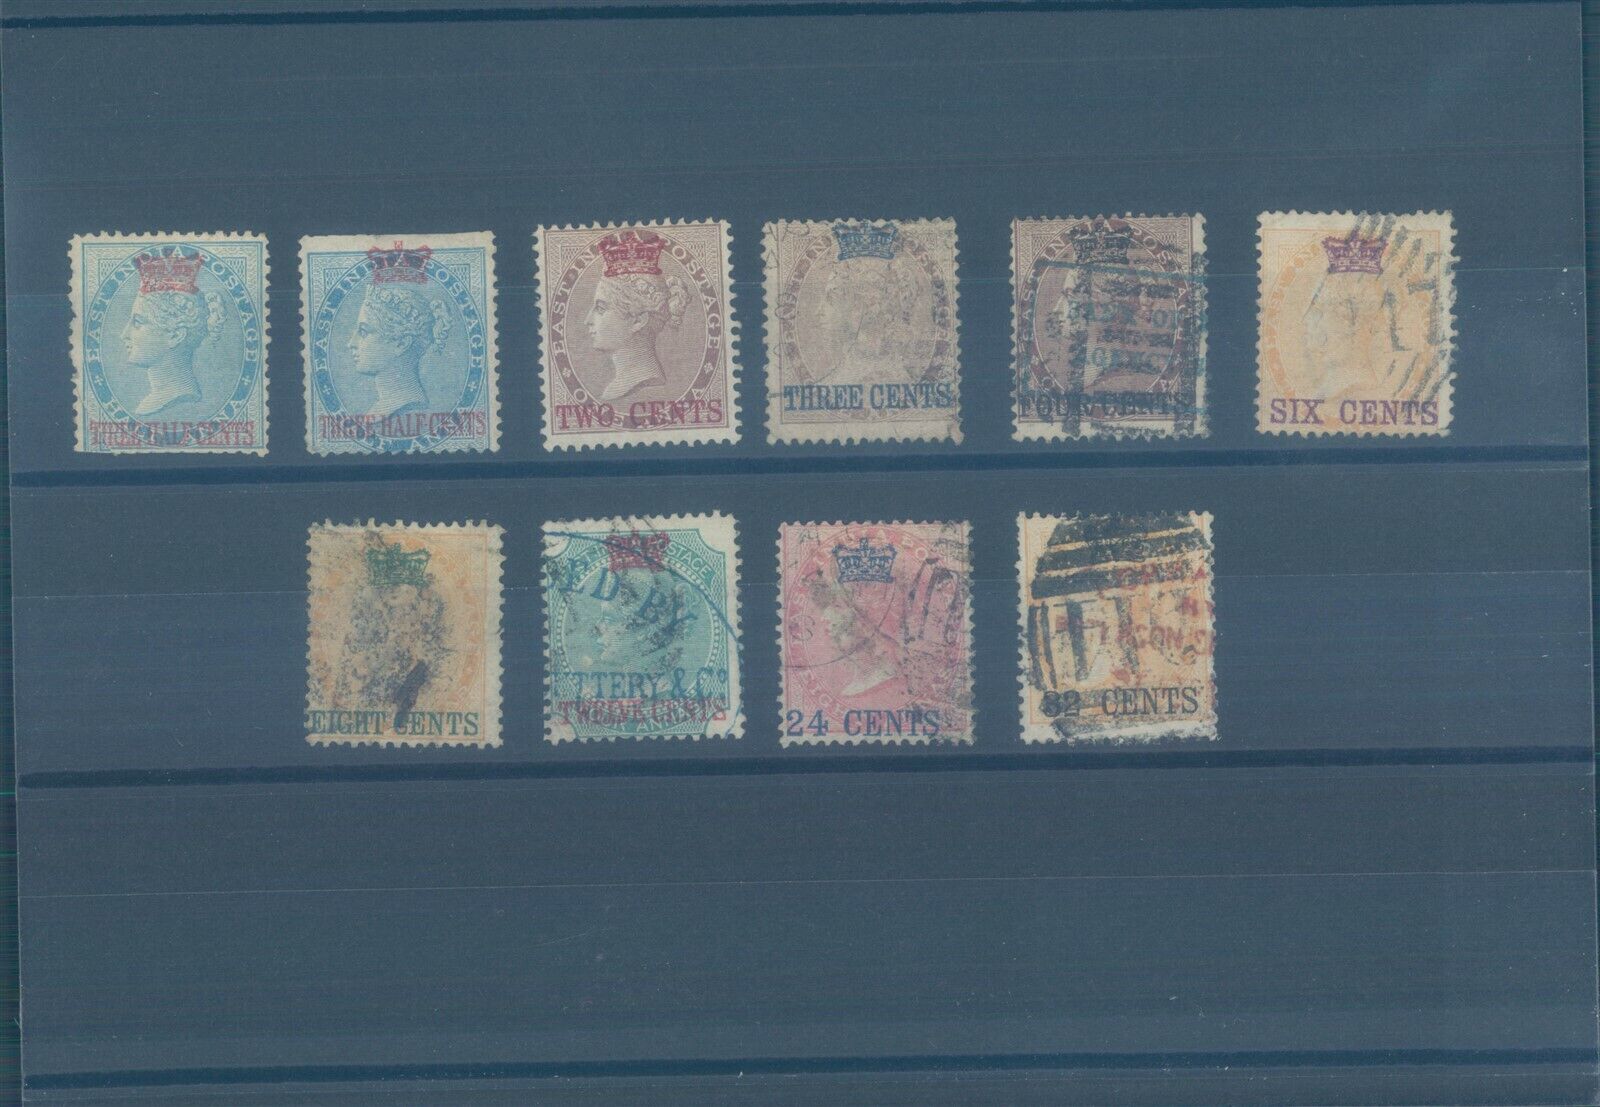 MALAYSIA Straits settlements rare MH used SEAL limited Ranking TOP11 product EUR20 CV $2350 stamps